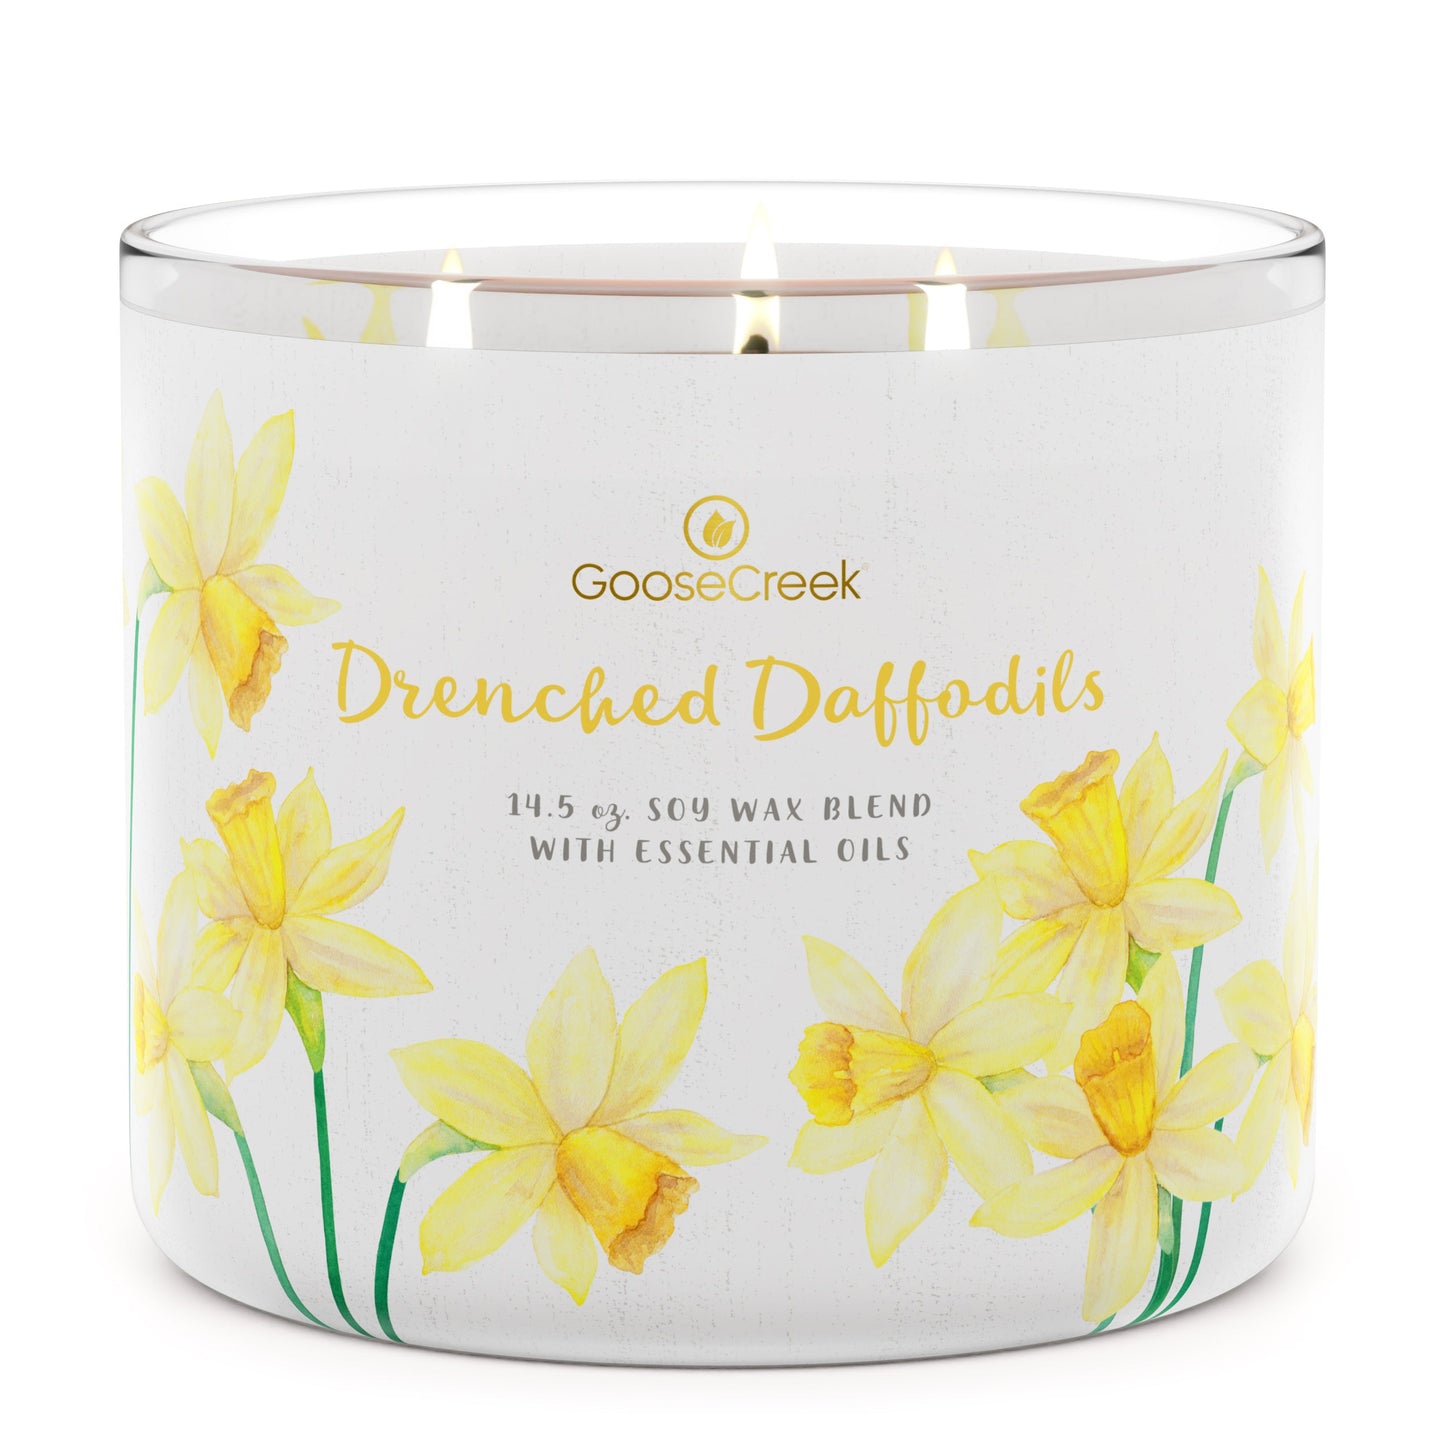 Load image into Gallery viewer, Drenched Daffodils Large 3-Wick Candle
